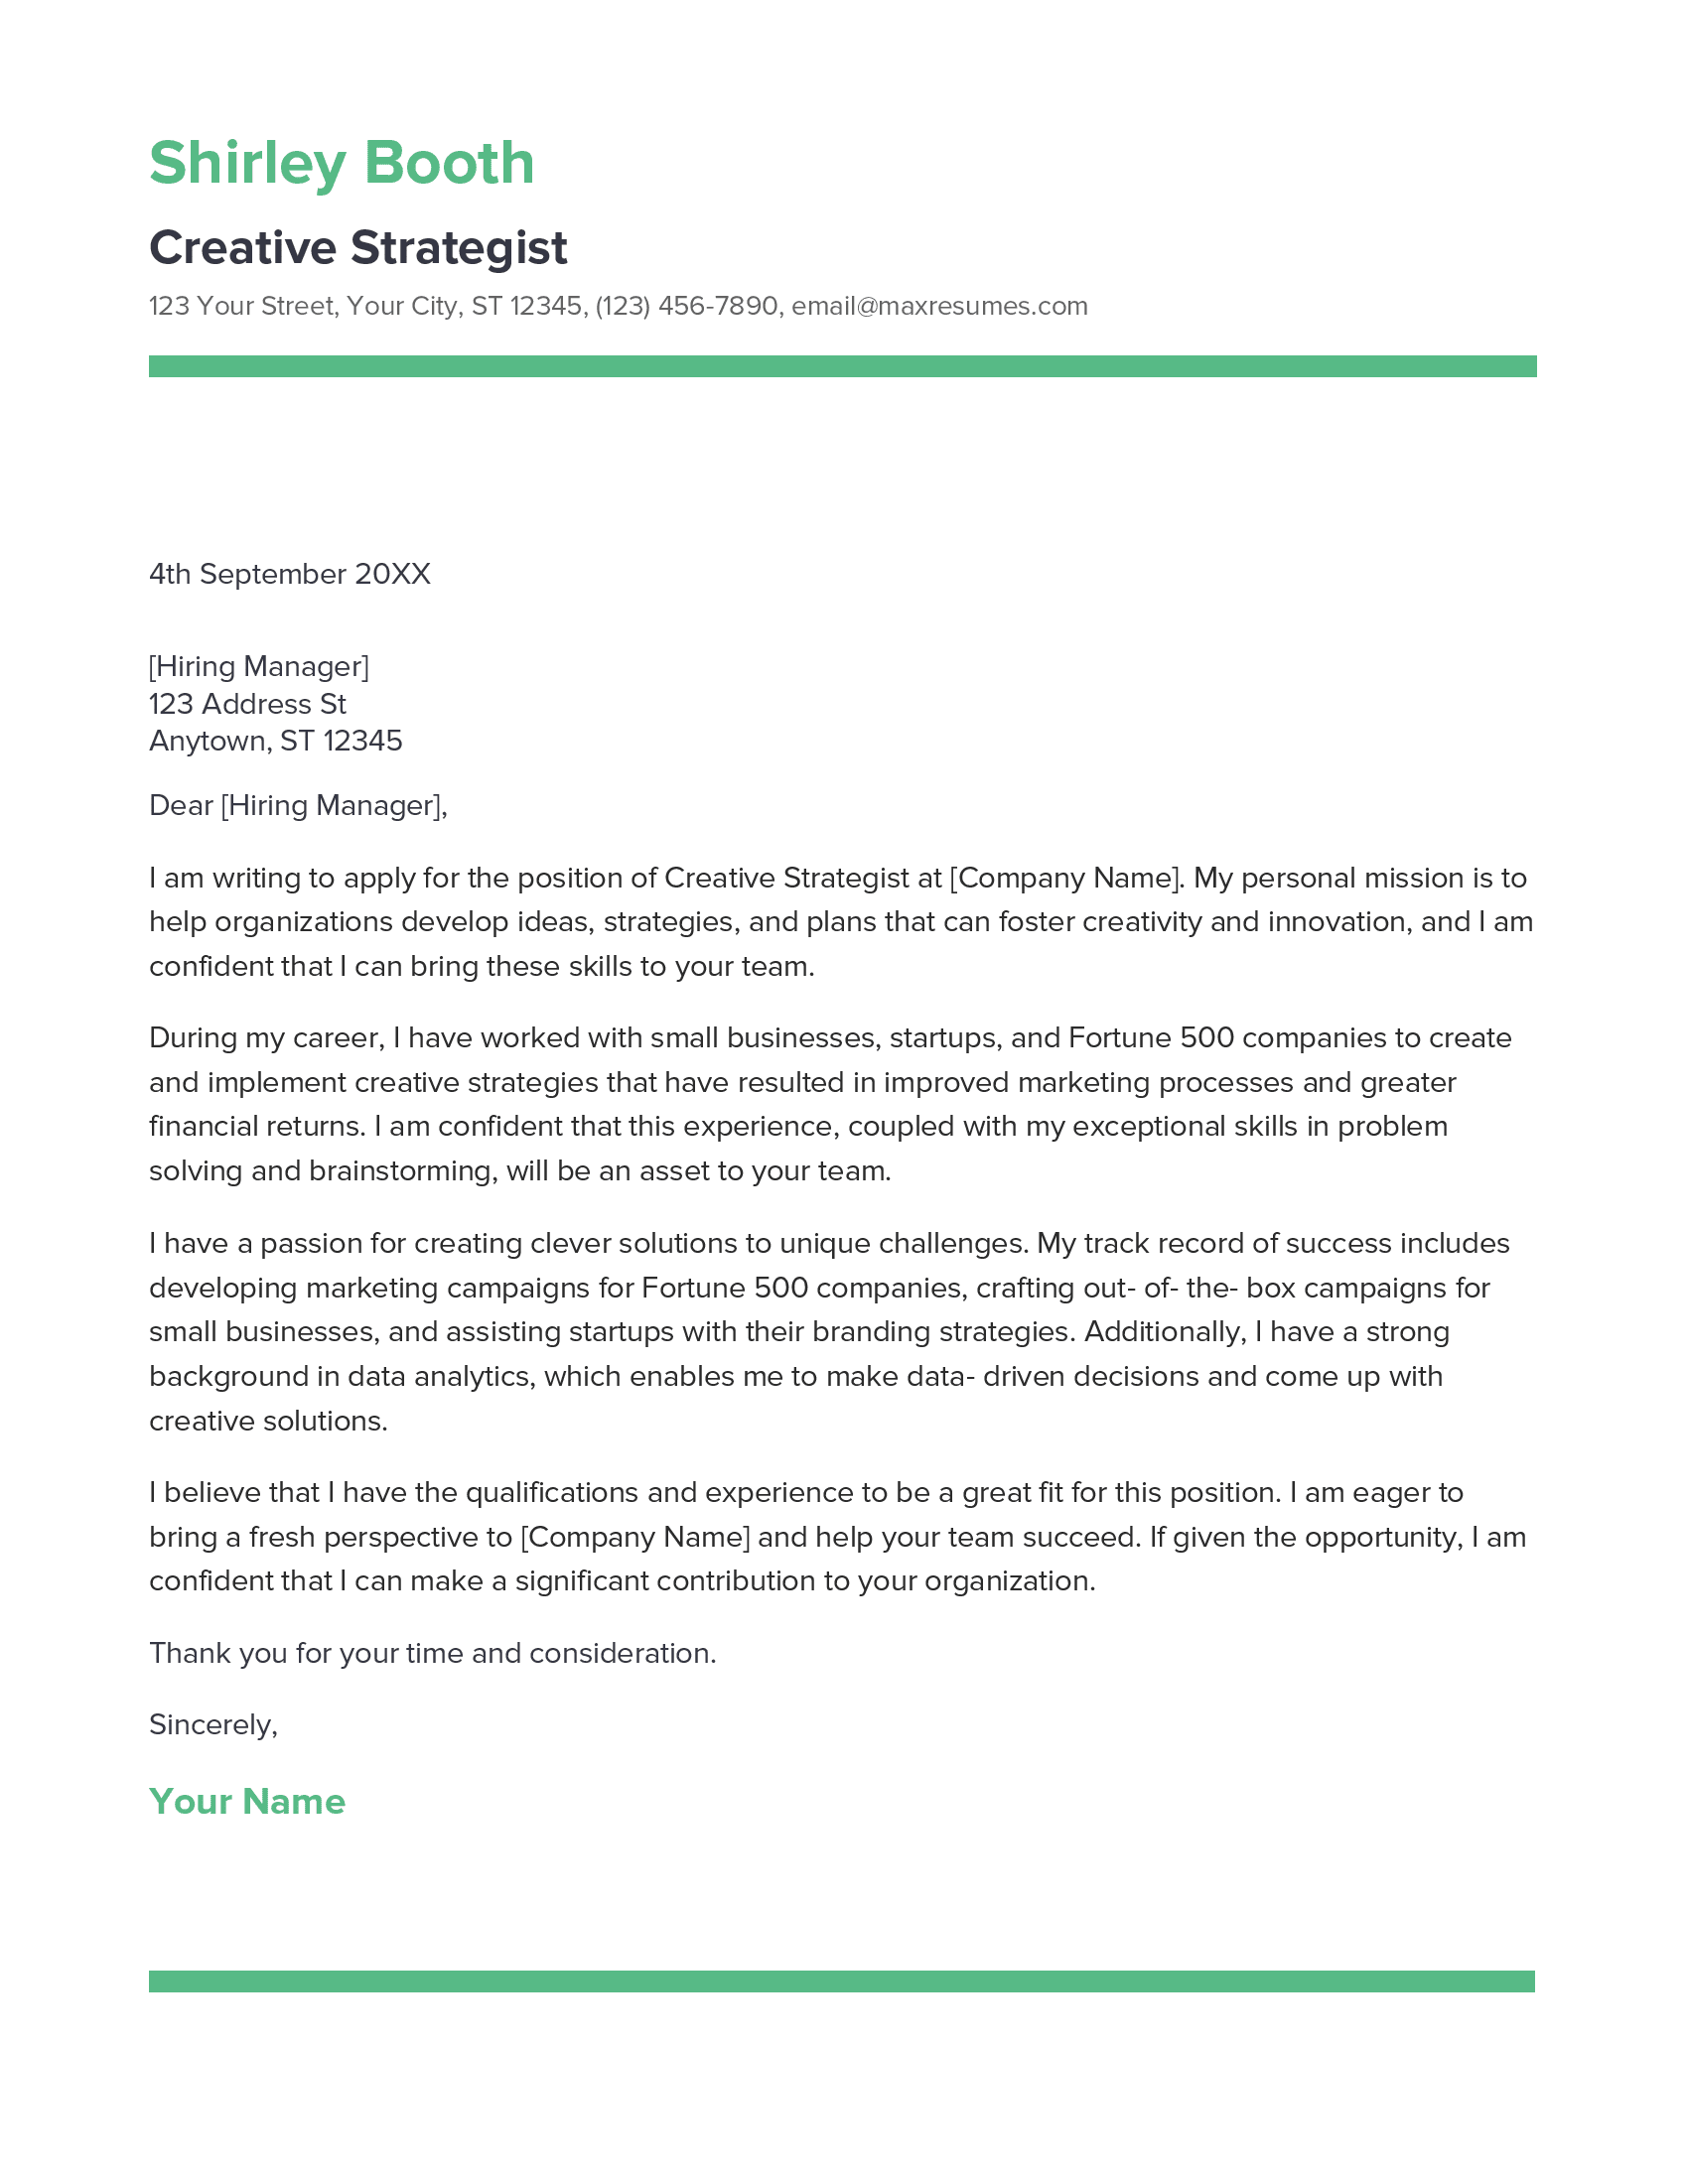 Creative Strategist Cover Letter Example